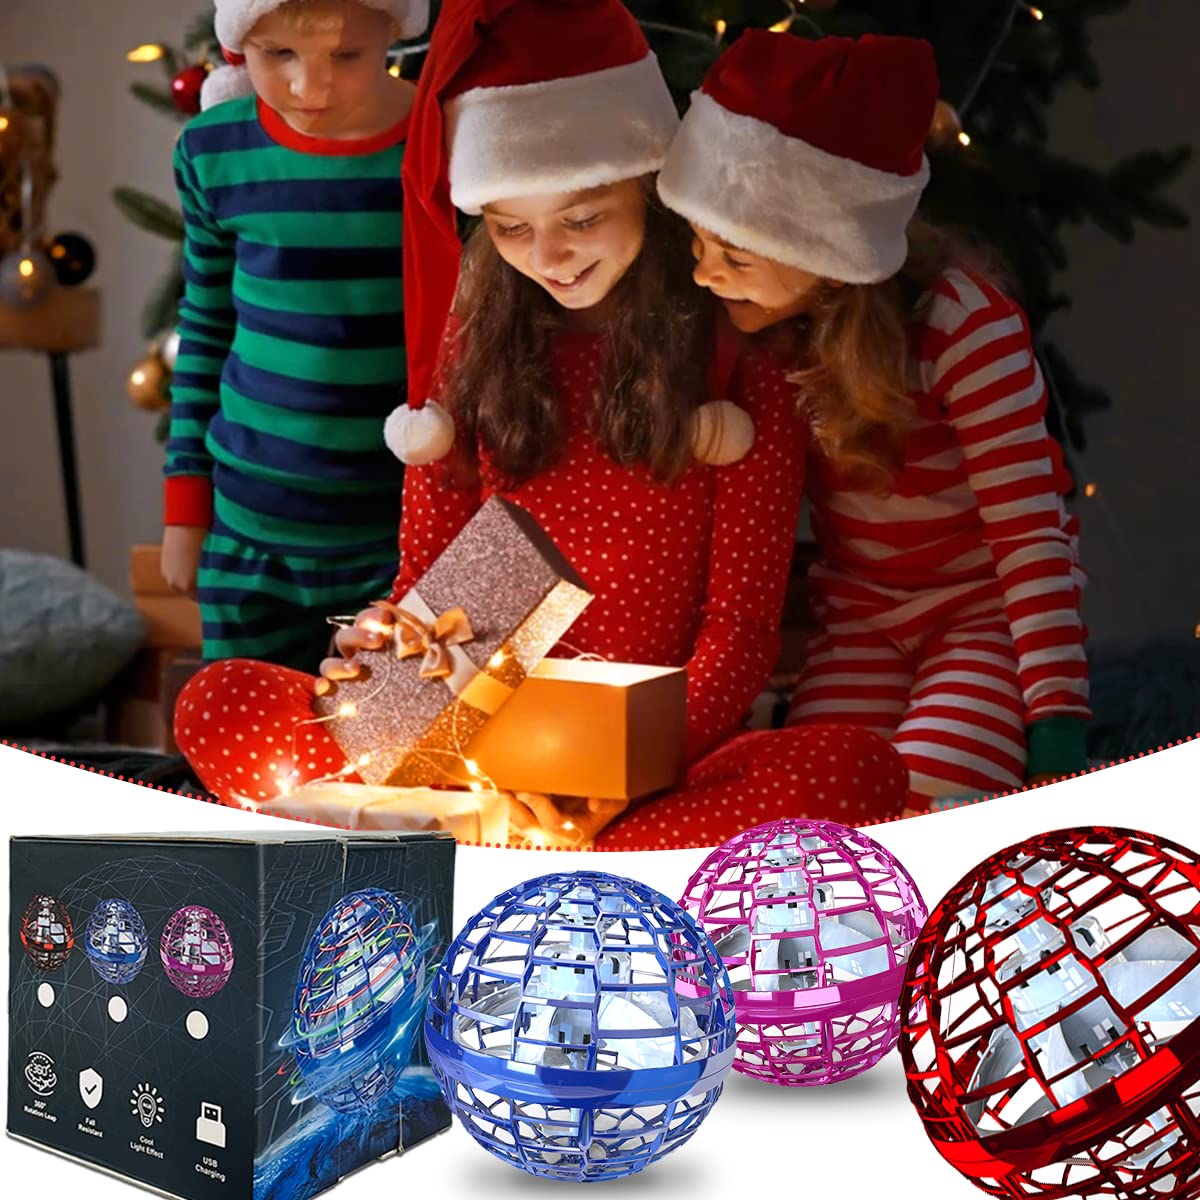 Fly Boomerang Mini Drone for Kids 360° Rotating Hand Controlled Flying Space Ball for Boys Girls Christmas Gift